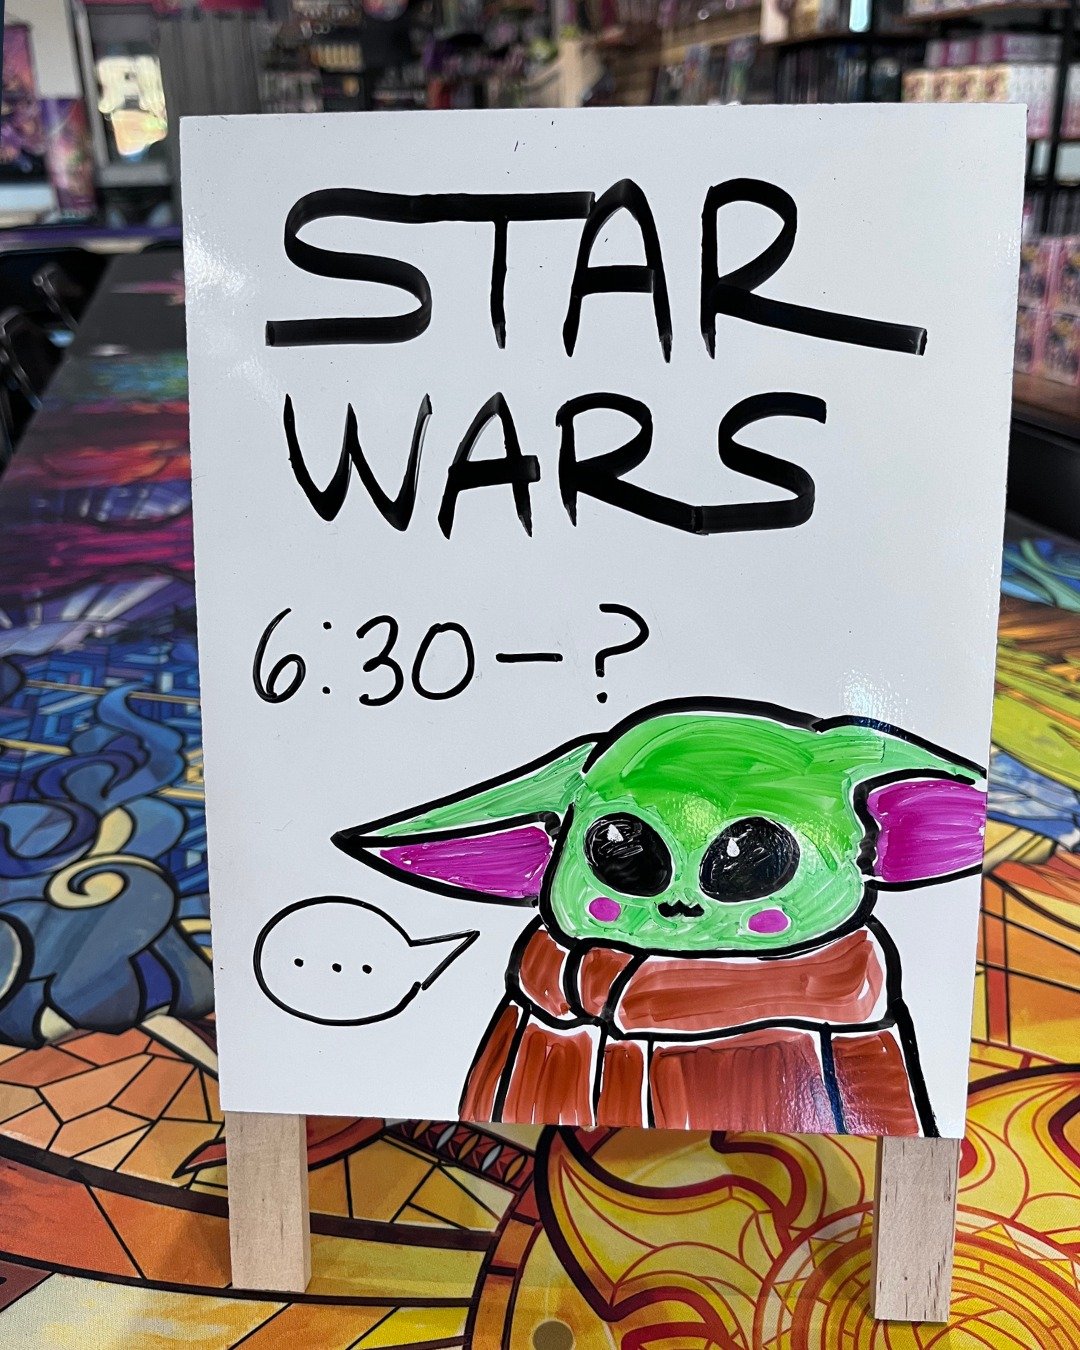 It's Star Wars night at The A.L.A.! ✨

Stop by at 6:30pm to play Star Wars Unlimited and may the force be with you. 🙏😉

📍 13 North Ave, Store 8, Milestone Square Pleasant Valley, NY

#hudsonvalleyhappenings #starwars #starwarsunlimited #tcg #tcgco